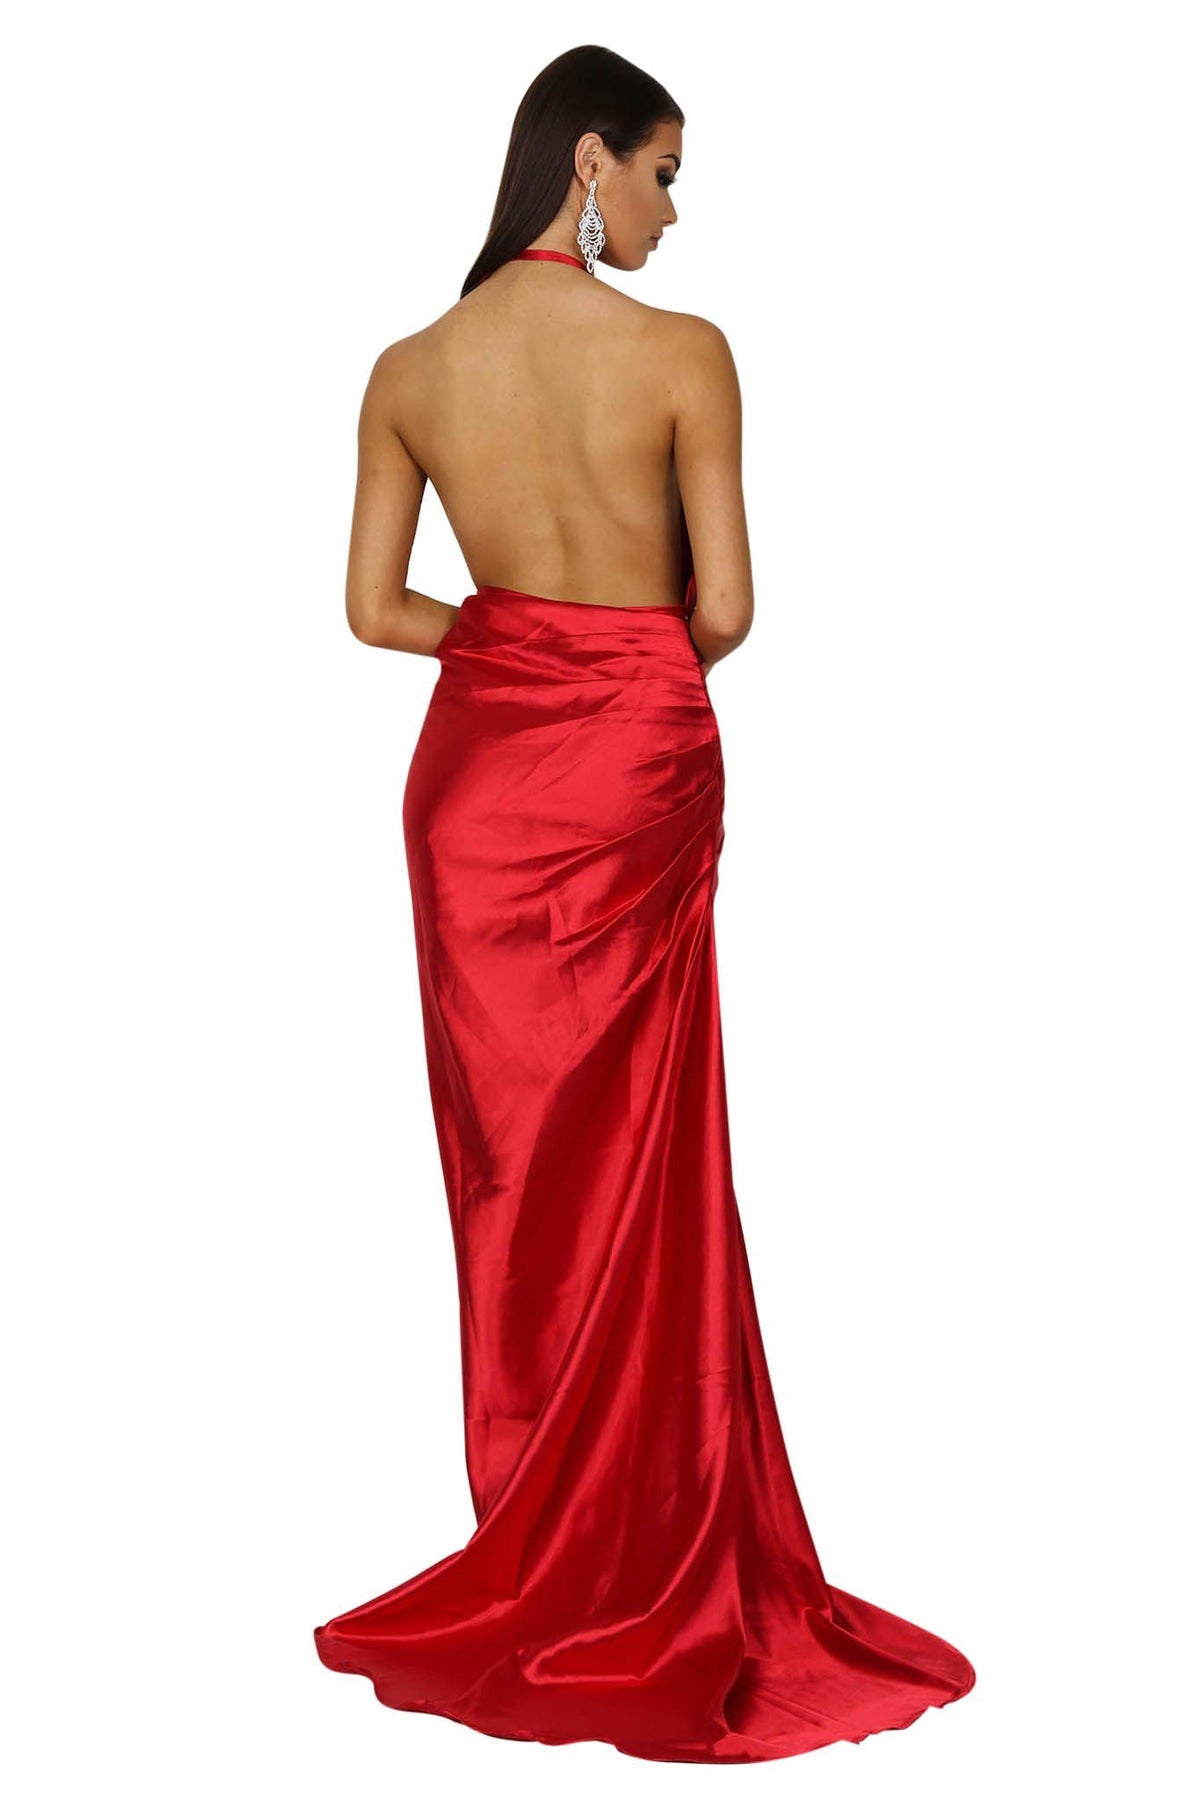 Backless design of red shiny satin maxi floor length evening sleeveless gown with pleated detailing at the front, deep V neckline, thigh high slit, open back, long train 